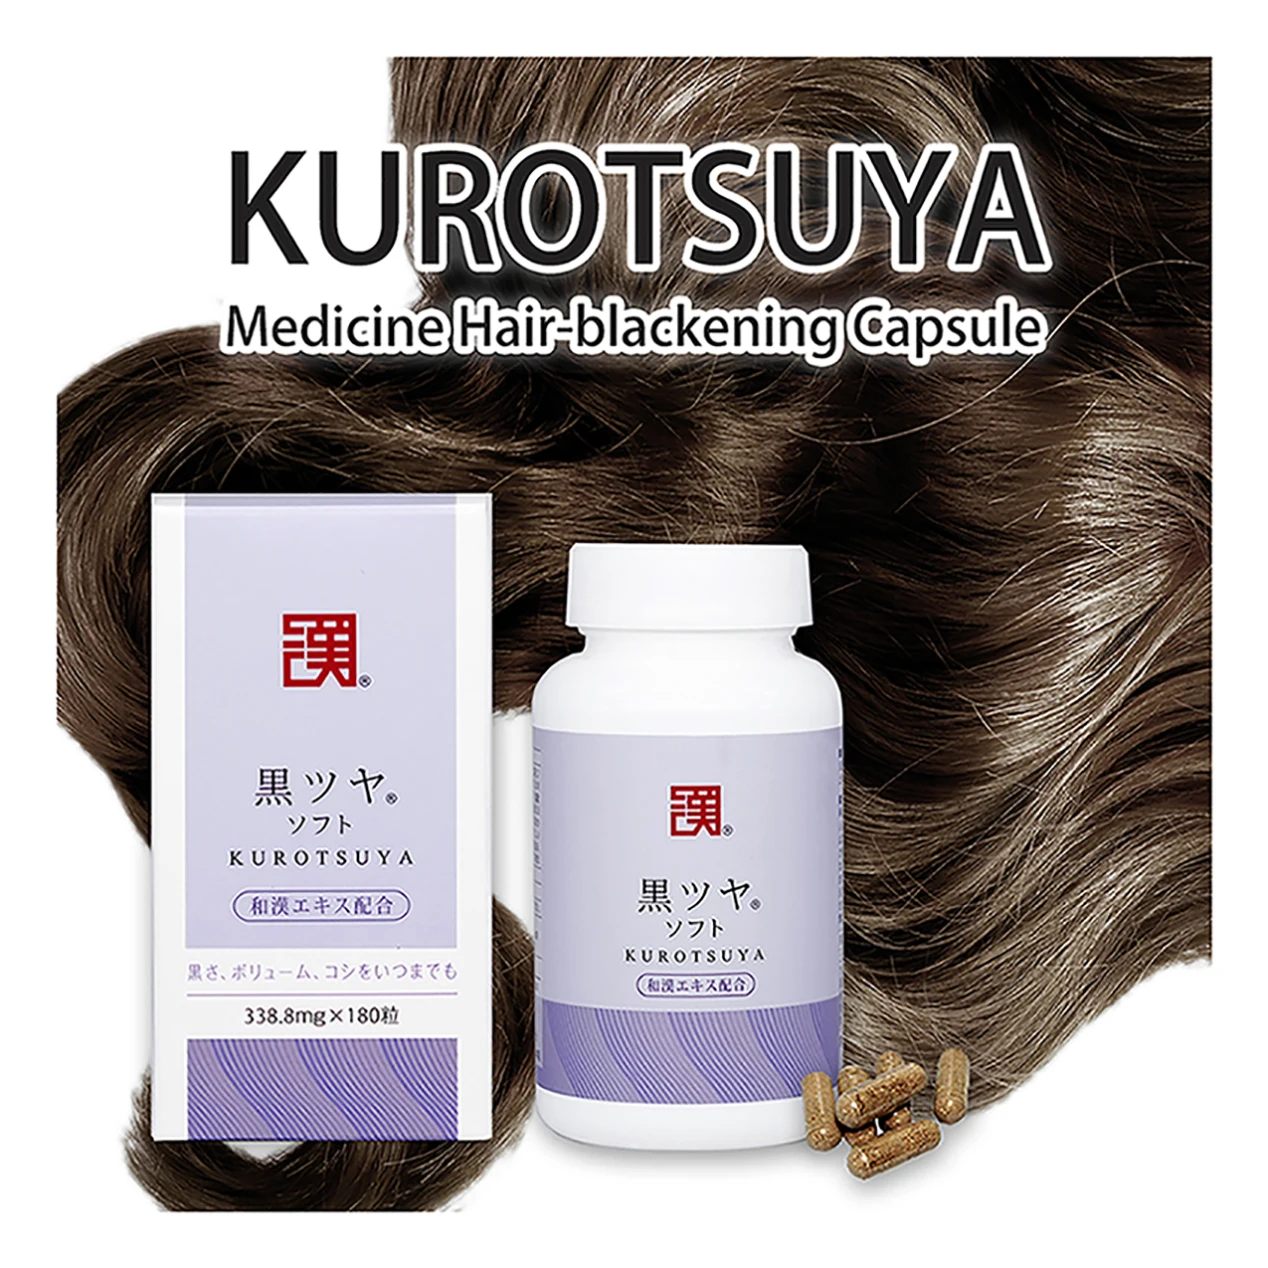 Japanese Top Selling Related Healty Products Growth Hair Loss Tonic - Buy Hair  Tonic,Hair Tonic Growth,Hair Loss Tonic Product on 